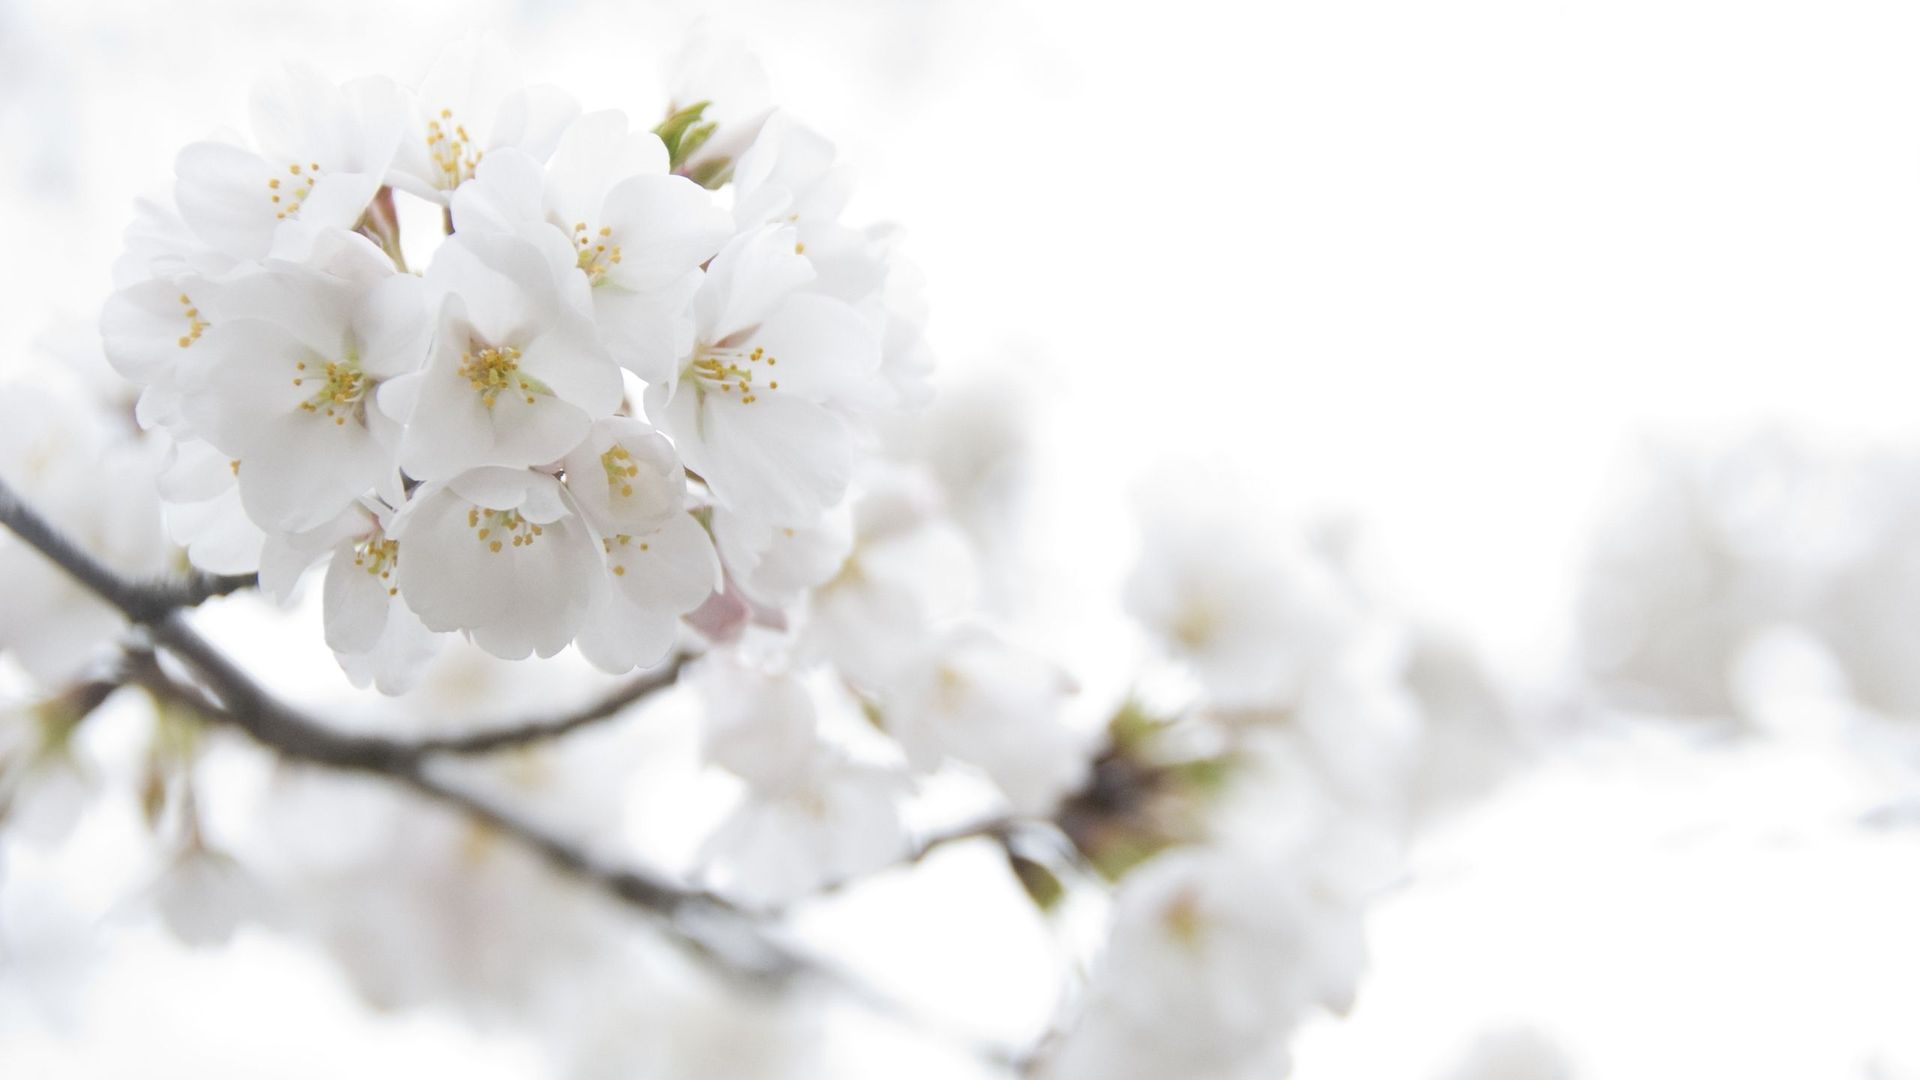 Backgrounds of White Flowers | 1920x1080